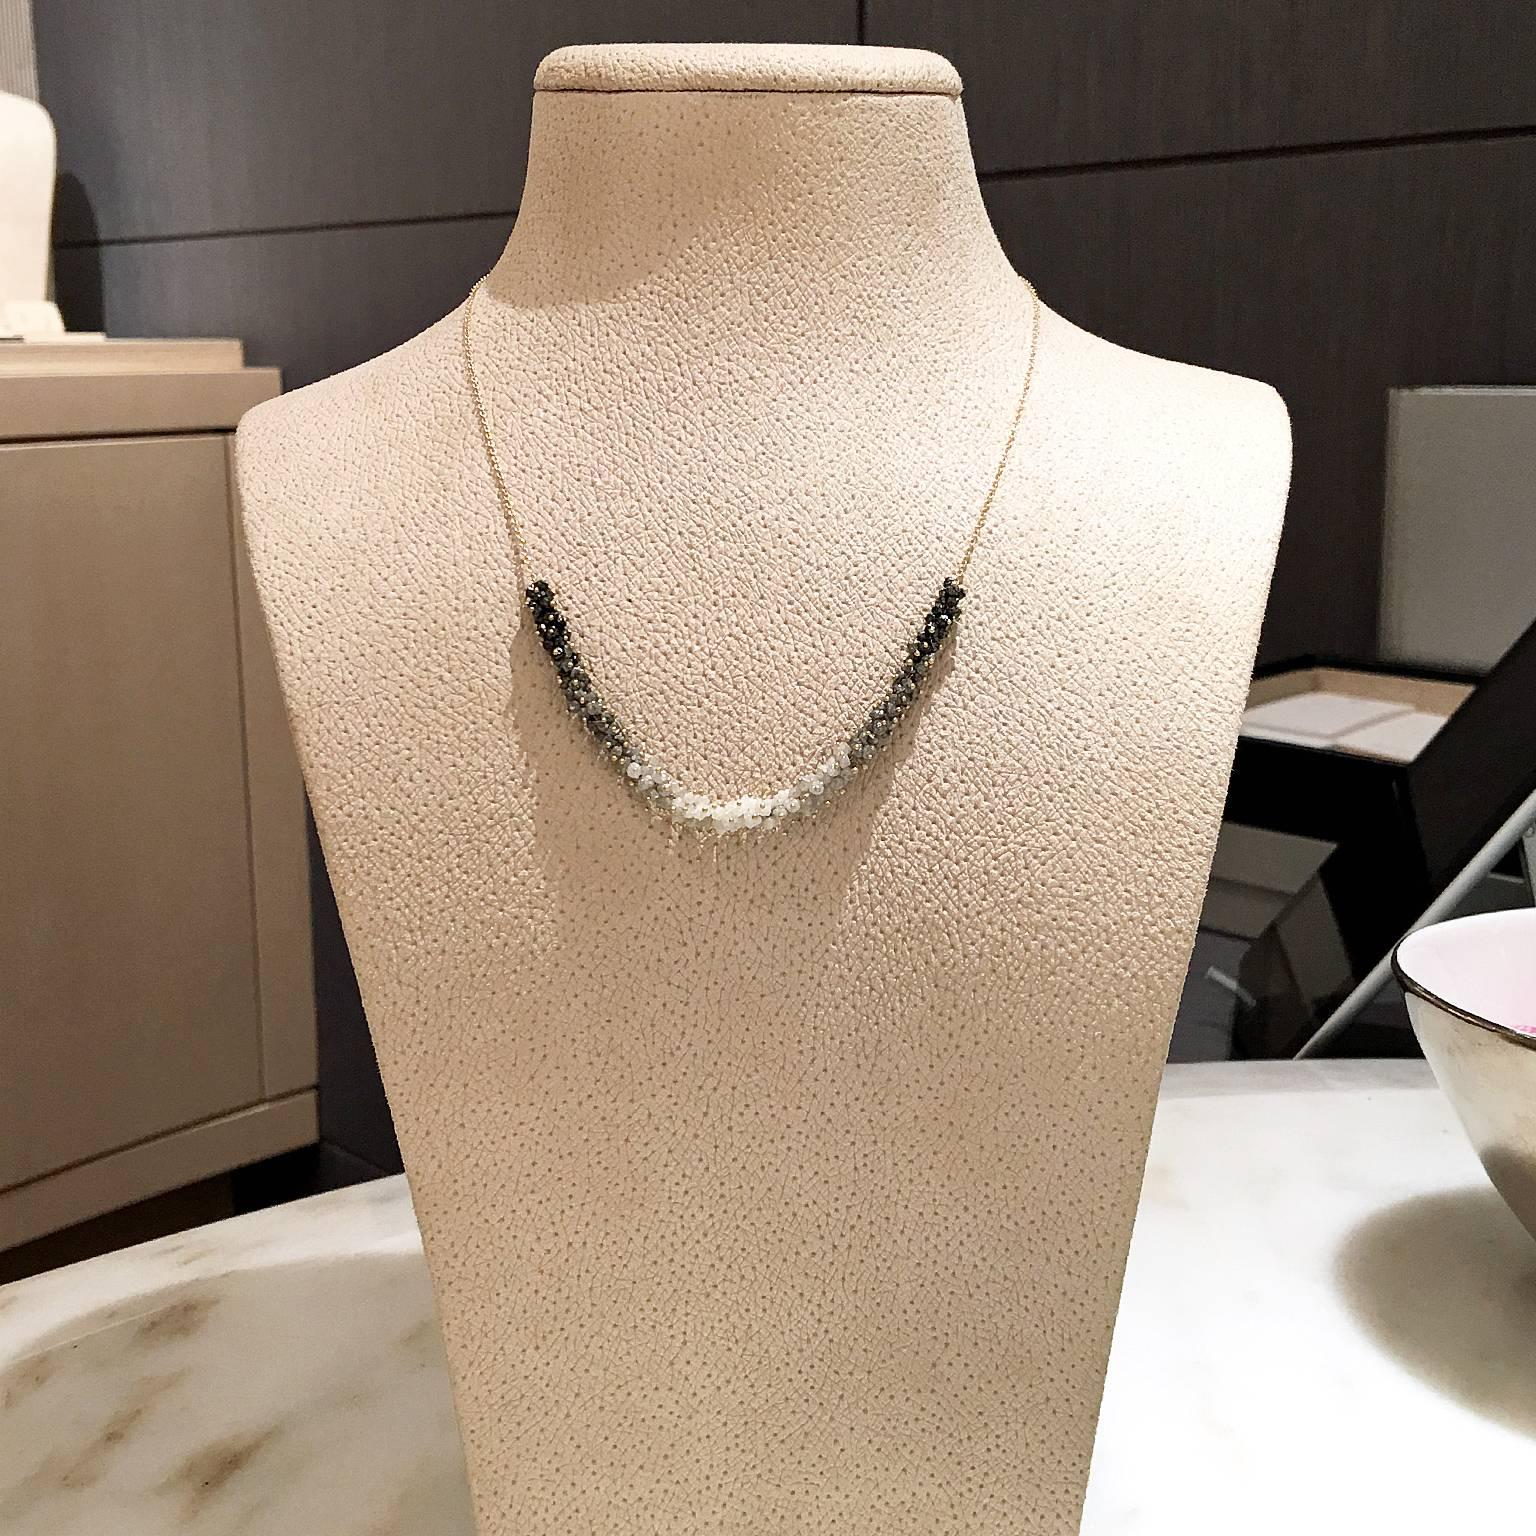 One of a Kind Necklace handcrafted by jewelry artist Rebecca Overmann featuring 15 total carats of white, gray, and black diamonds, with each stone individually set on matte finished 14k yellow gold granulated accents. Diamonds are arranged and